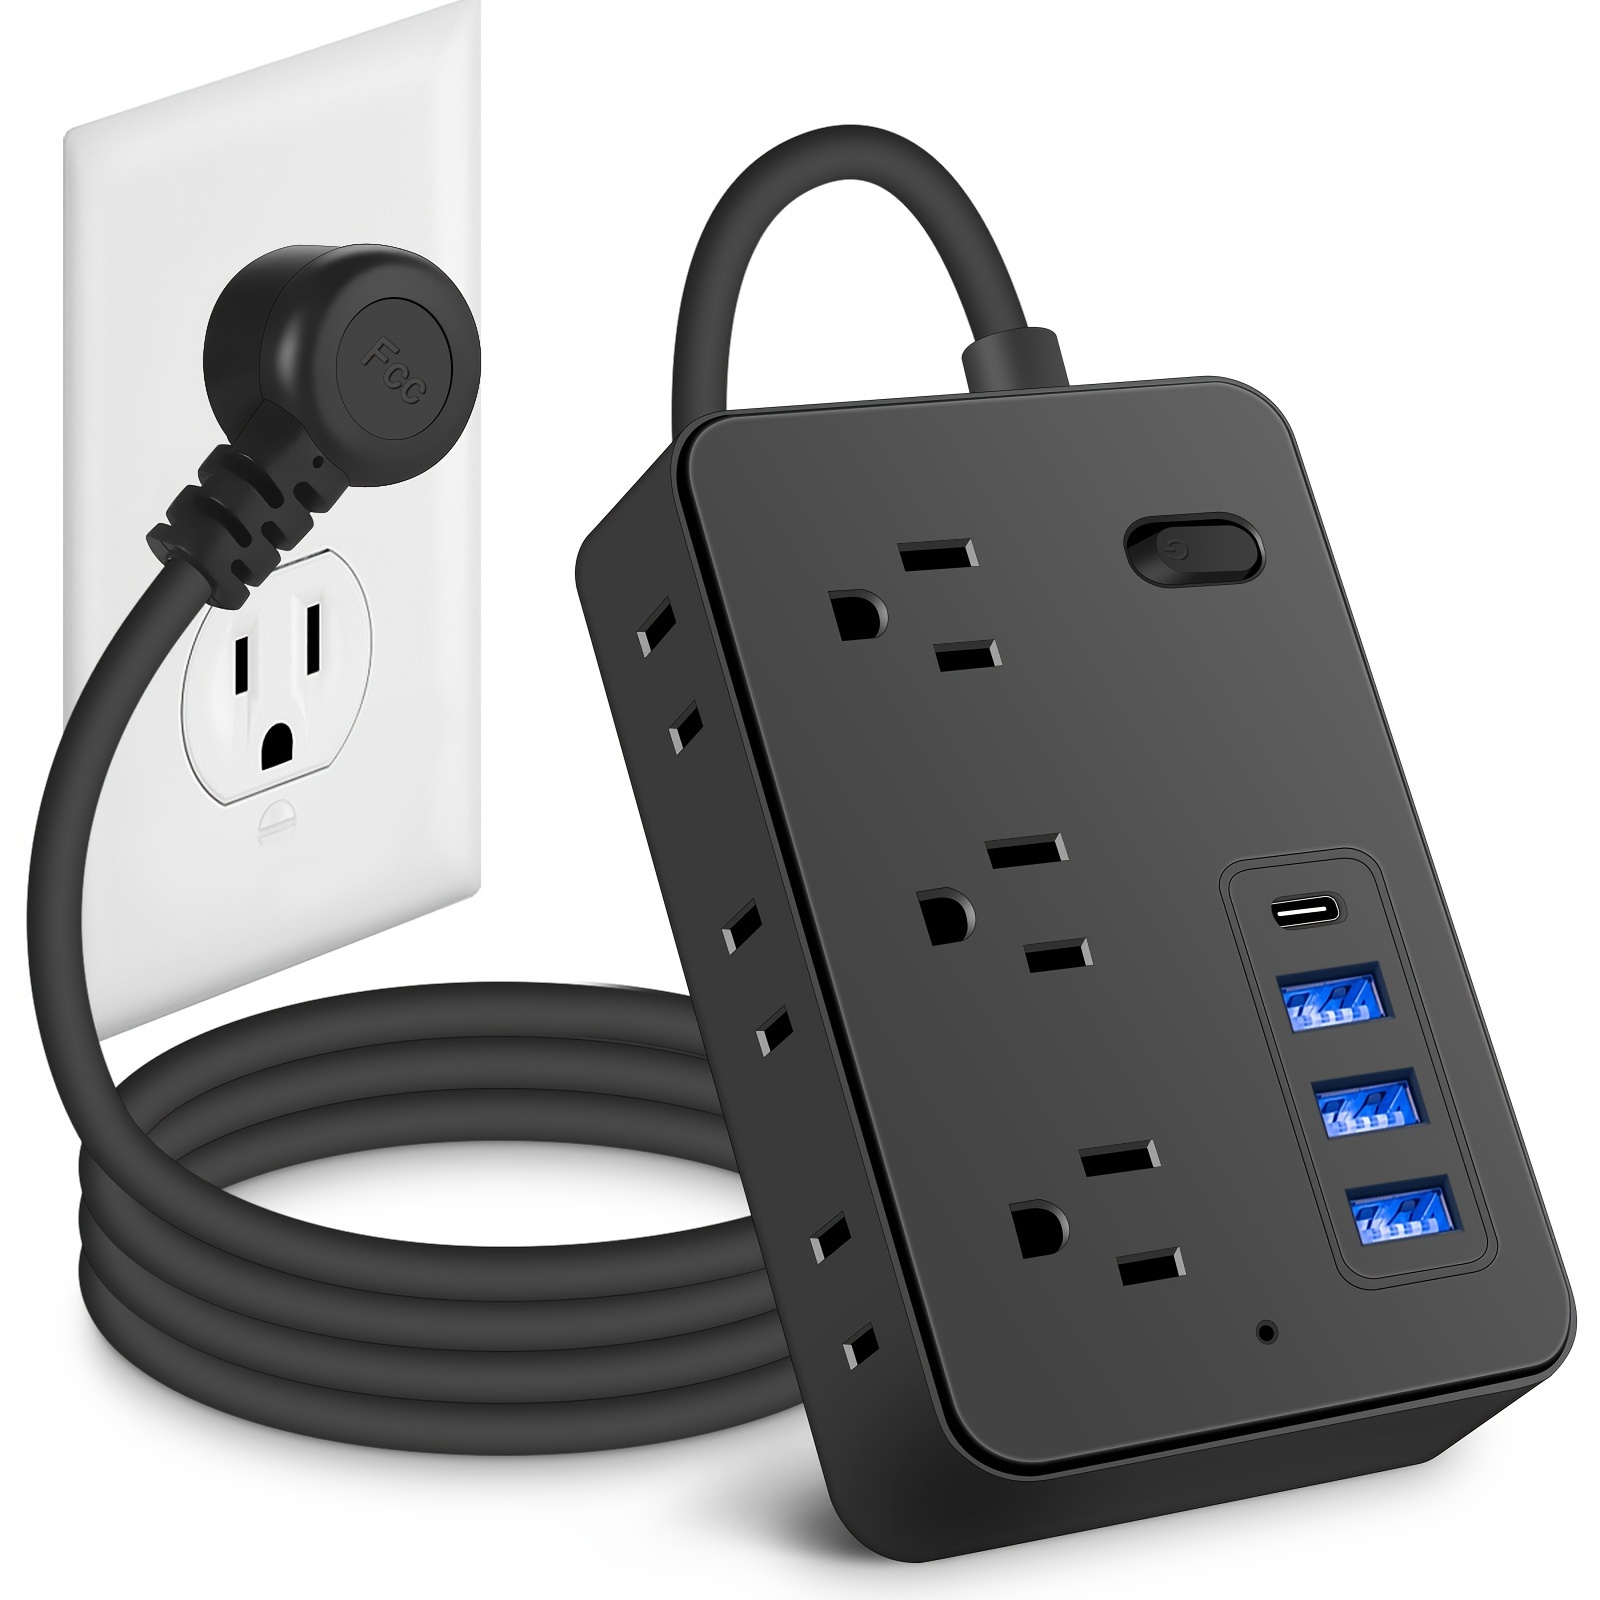 

1 Pc Surge Protector, Power Strip Surge Protector, With 6 Ac Socket And 3 + Usb Charging Port (usb 1 C), 3.9 Feet Travel Extension Rv Overload Surge Protector For Home/school/office/travel